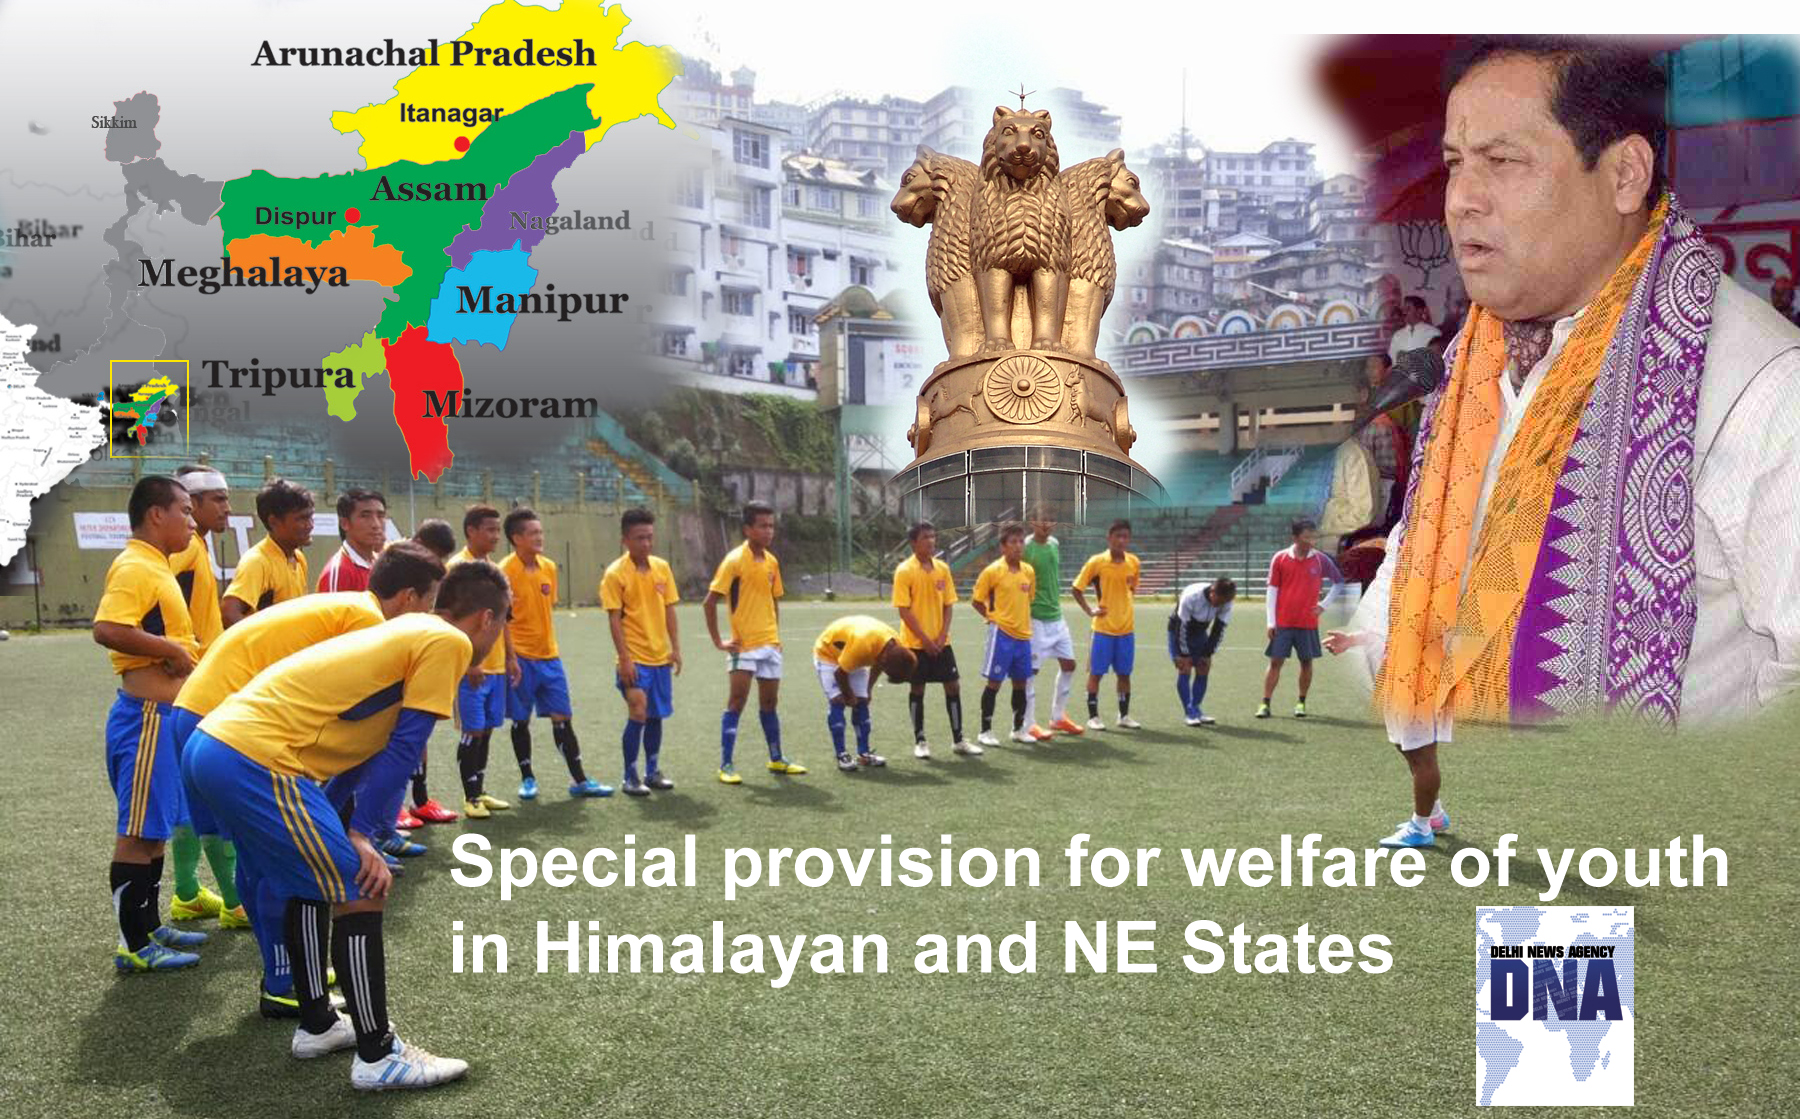 Special provision for welfare of youth in Himalayan and NE States